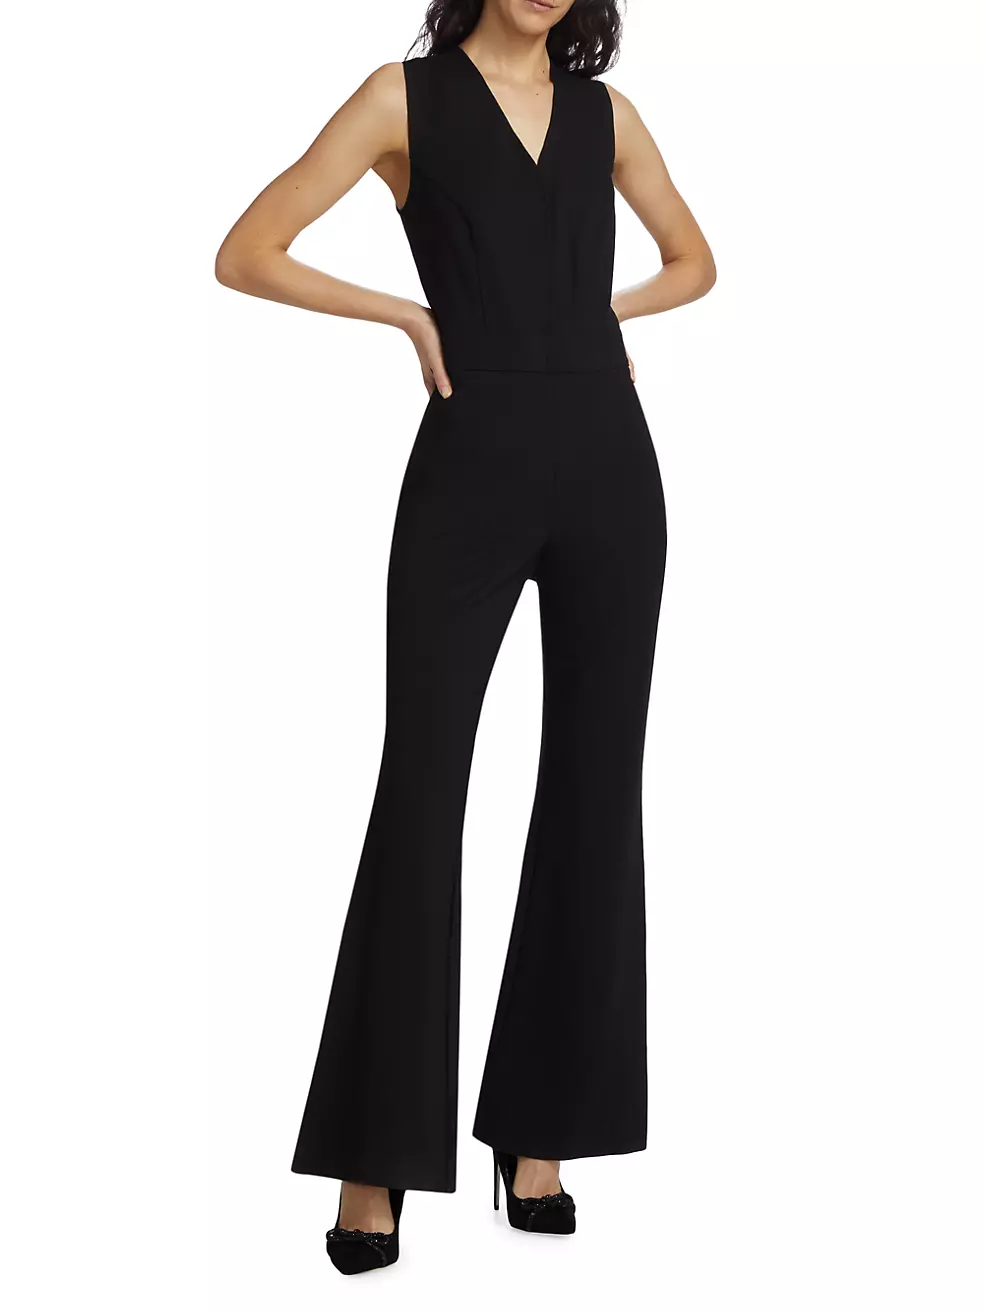 The best jumpsuit by @spanx Shop with the link in my bio! #spanx #jump